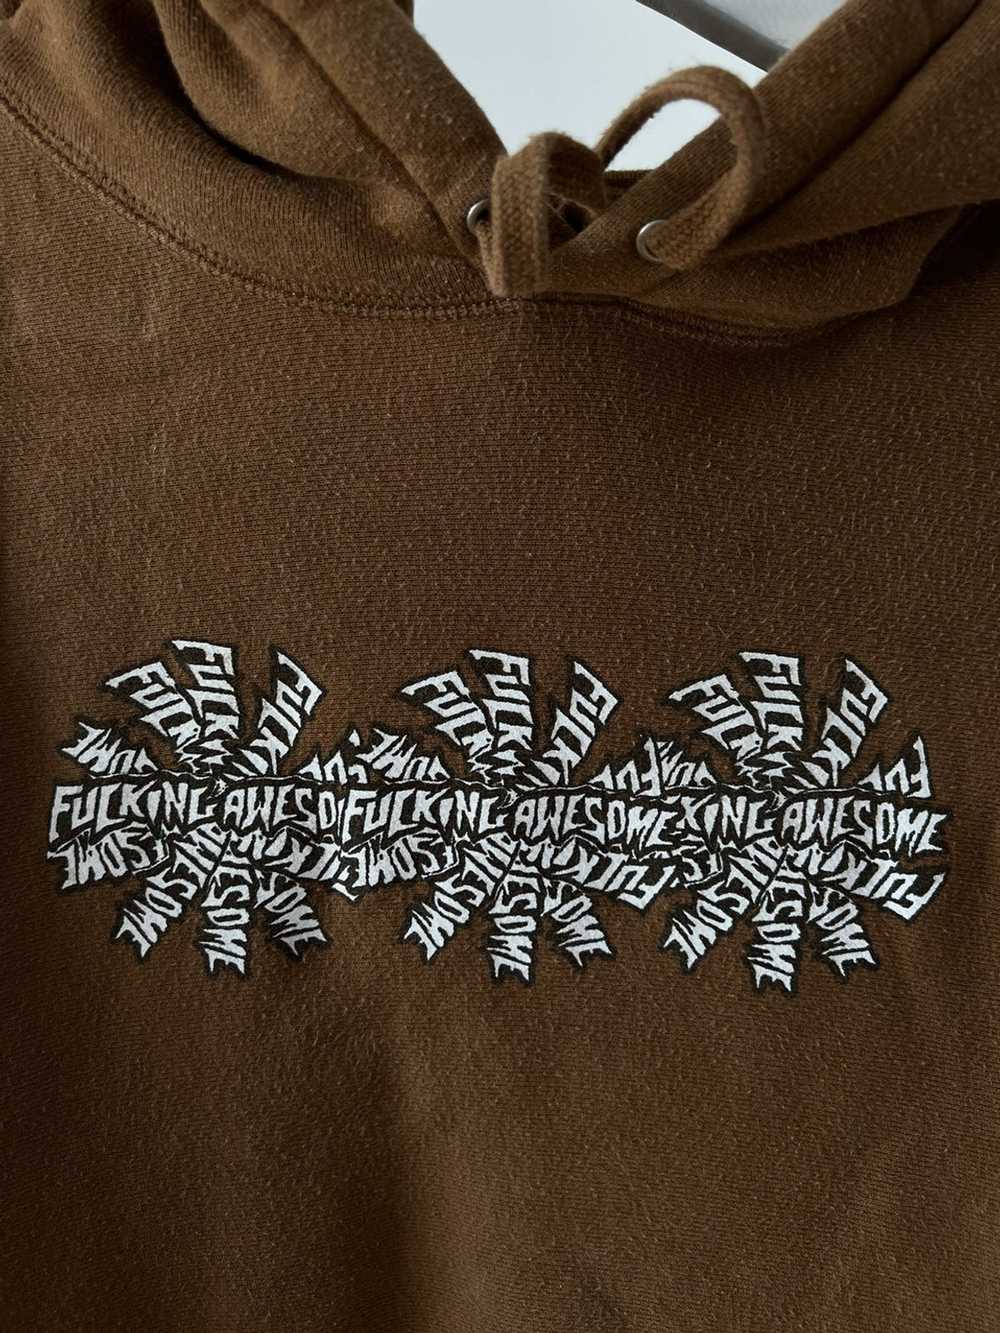 Fucking Awesome Fucking Awesome Hoodie - Brown (L) - image 2